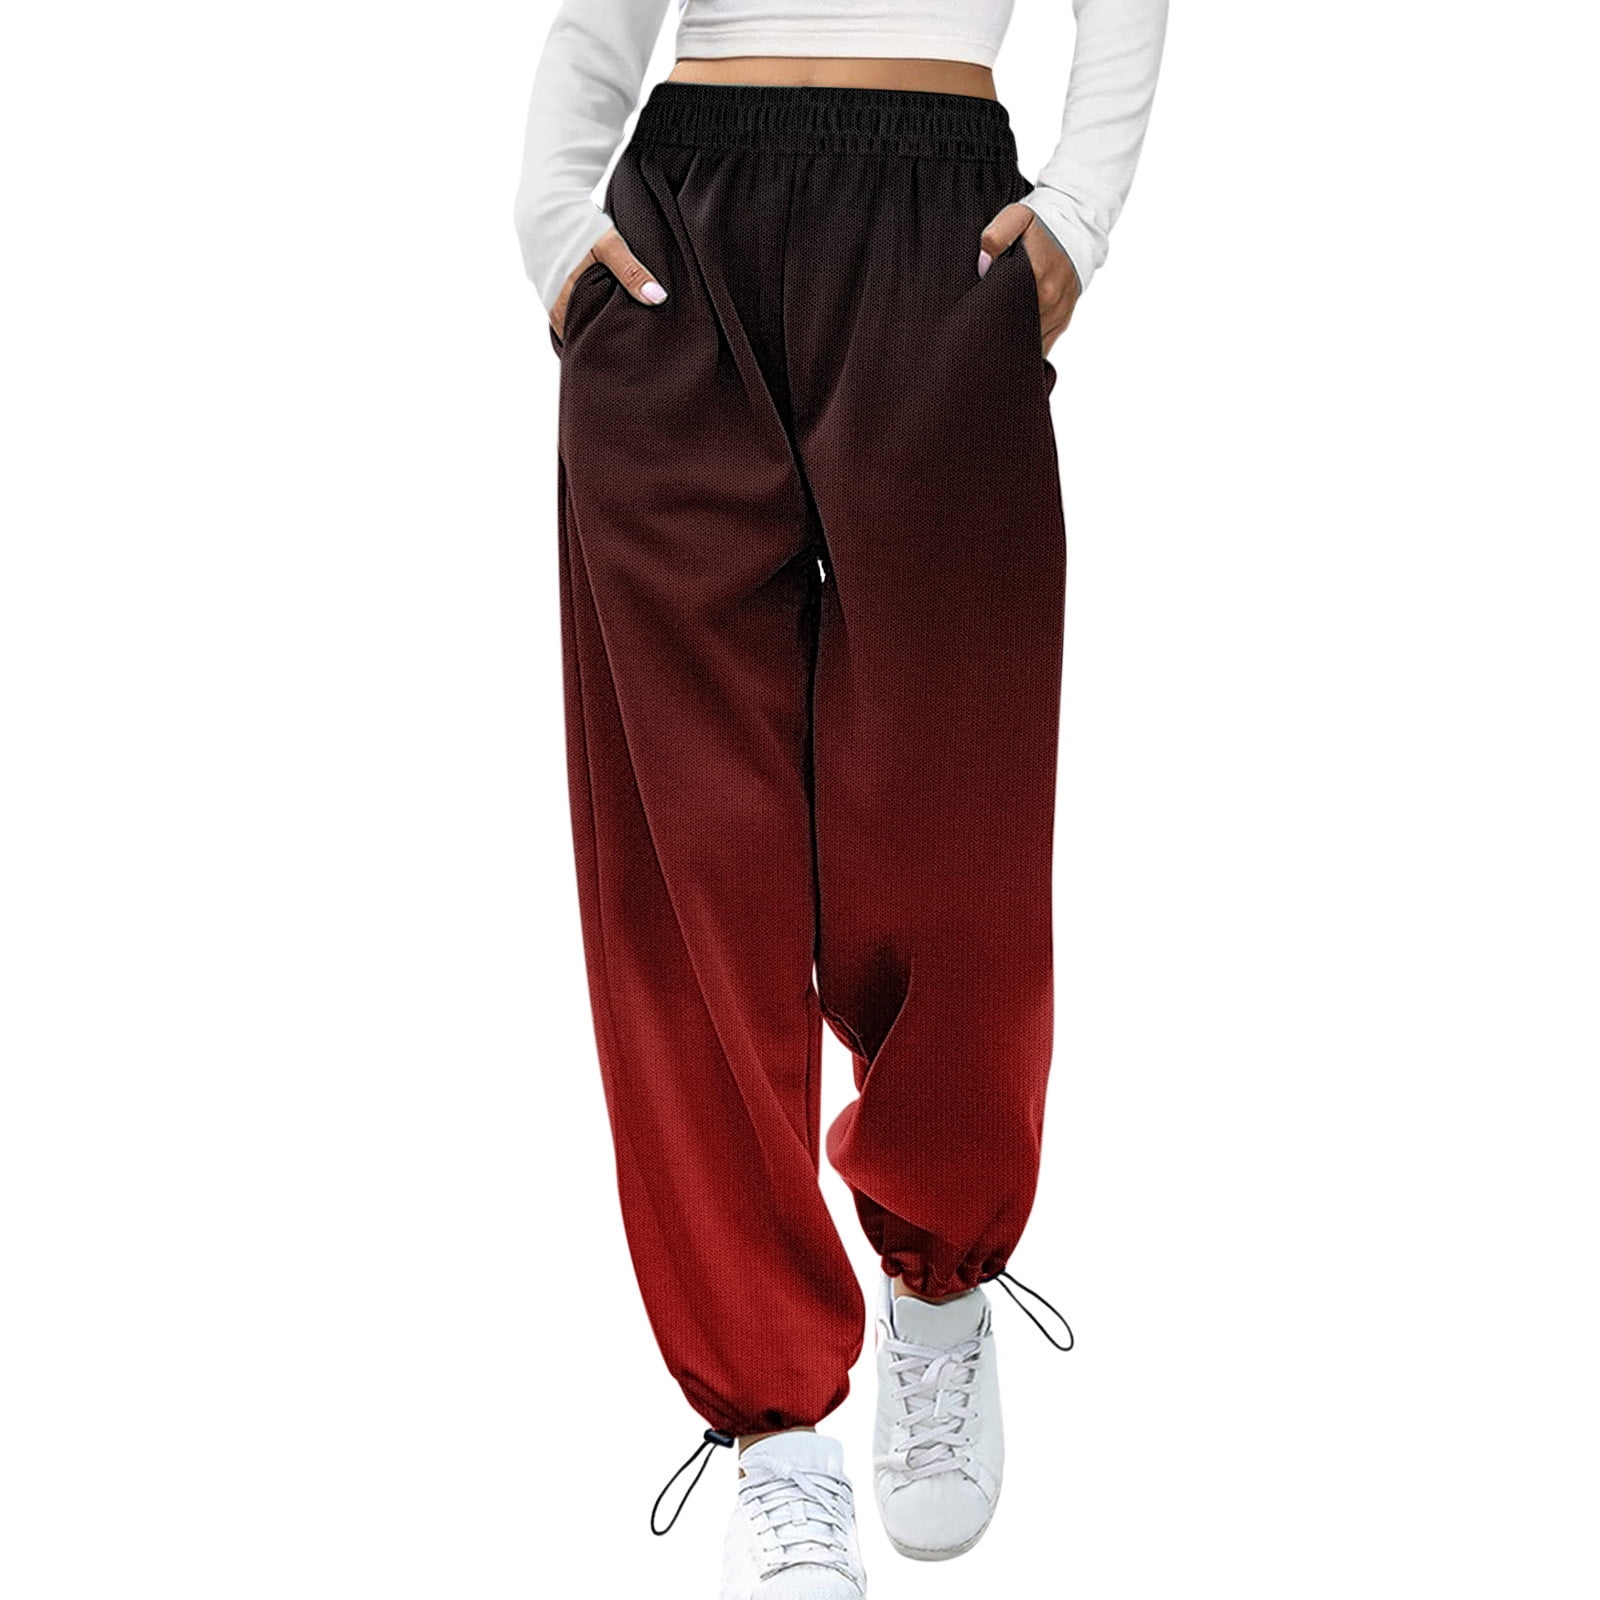 HSMQHJWE Womens Sweatpants Track Bottoms Cotton Joggers Casual